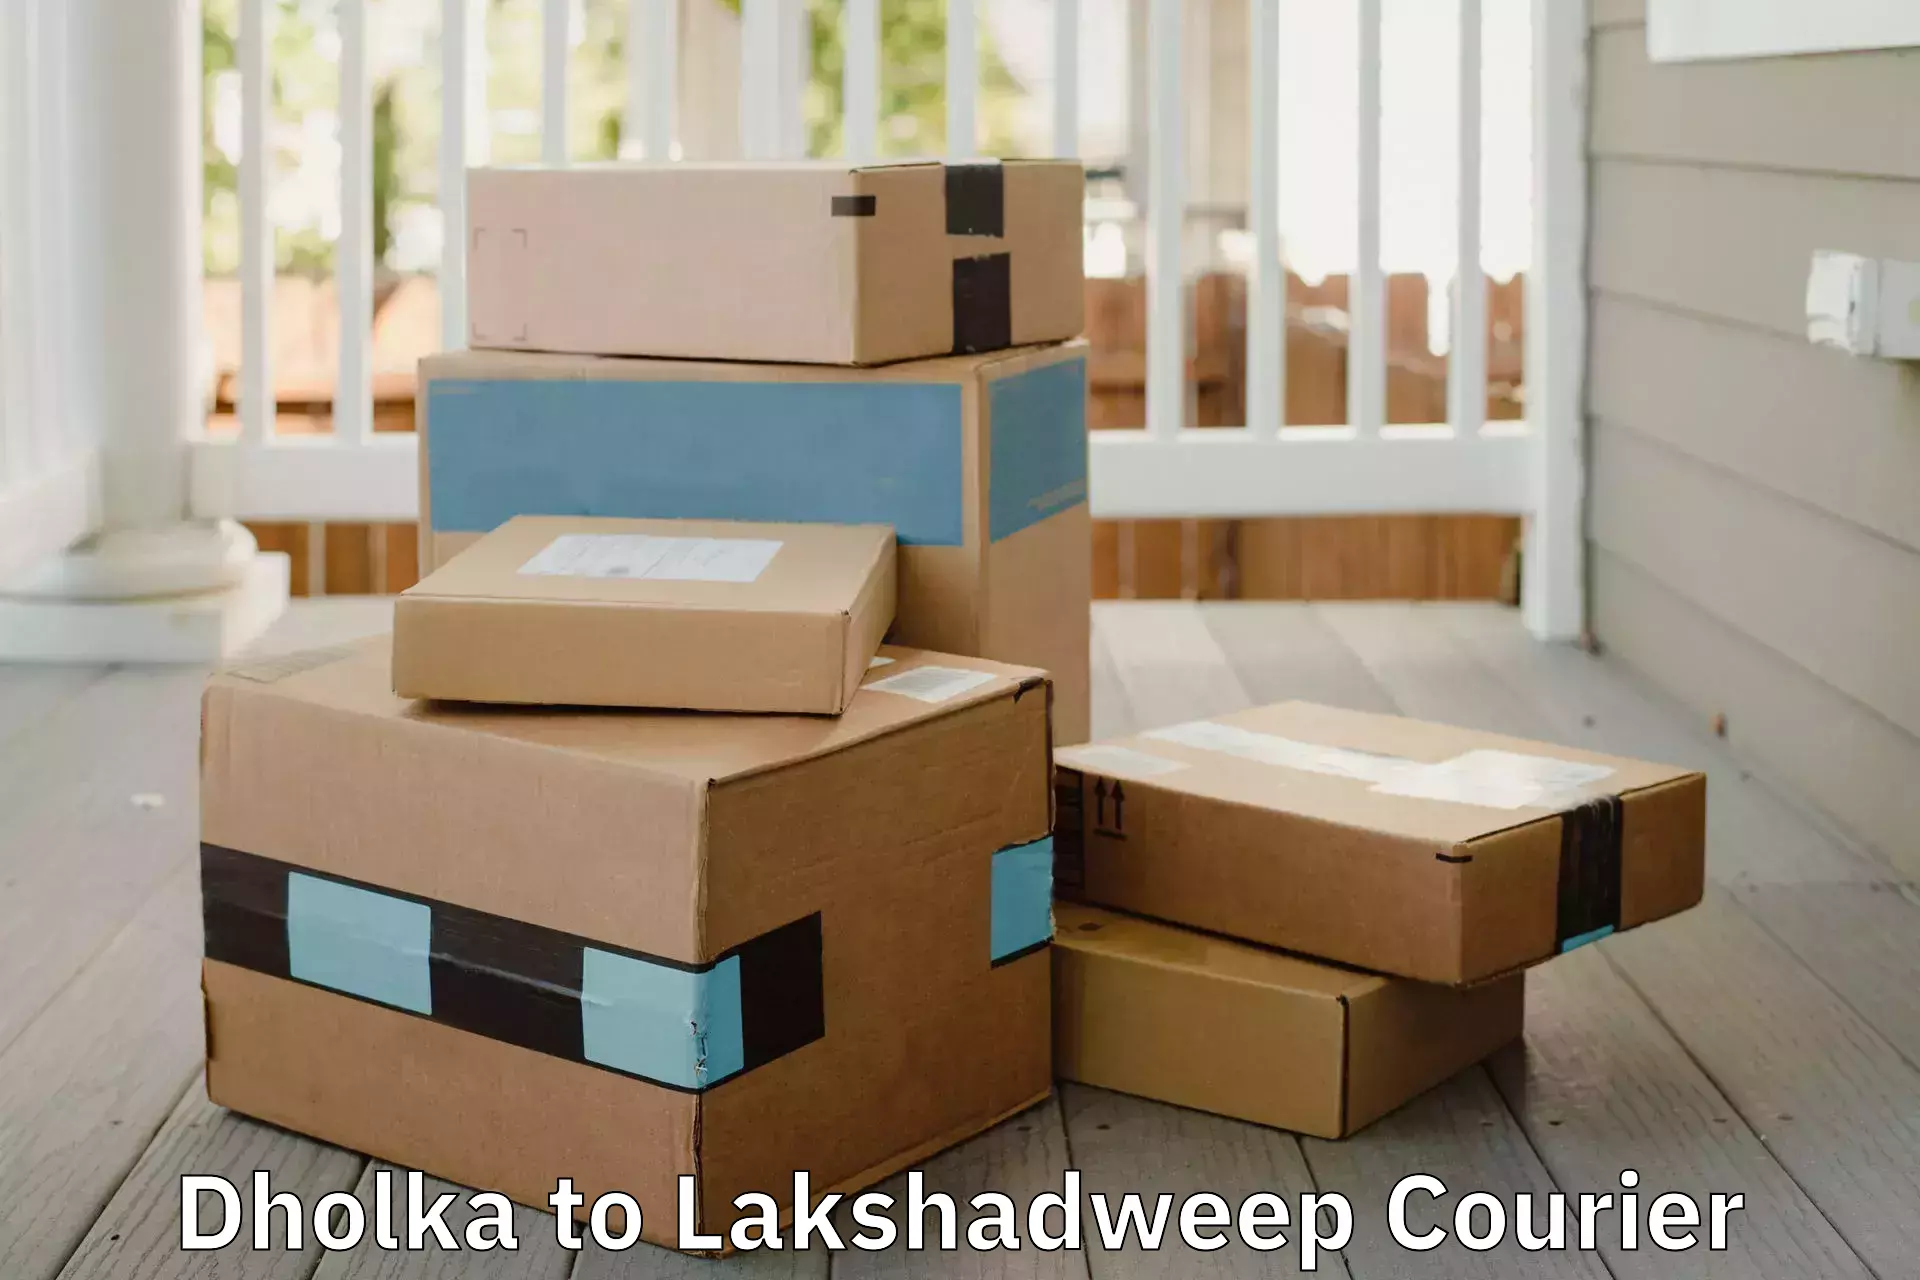 Trusted relocation experts Dholka to Lakshadweep